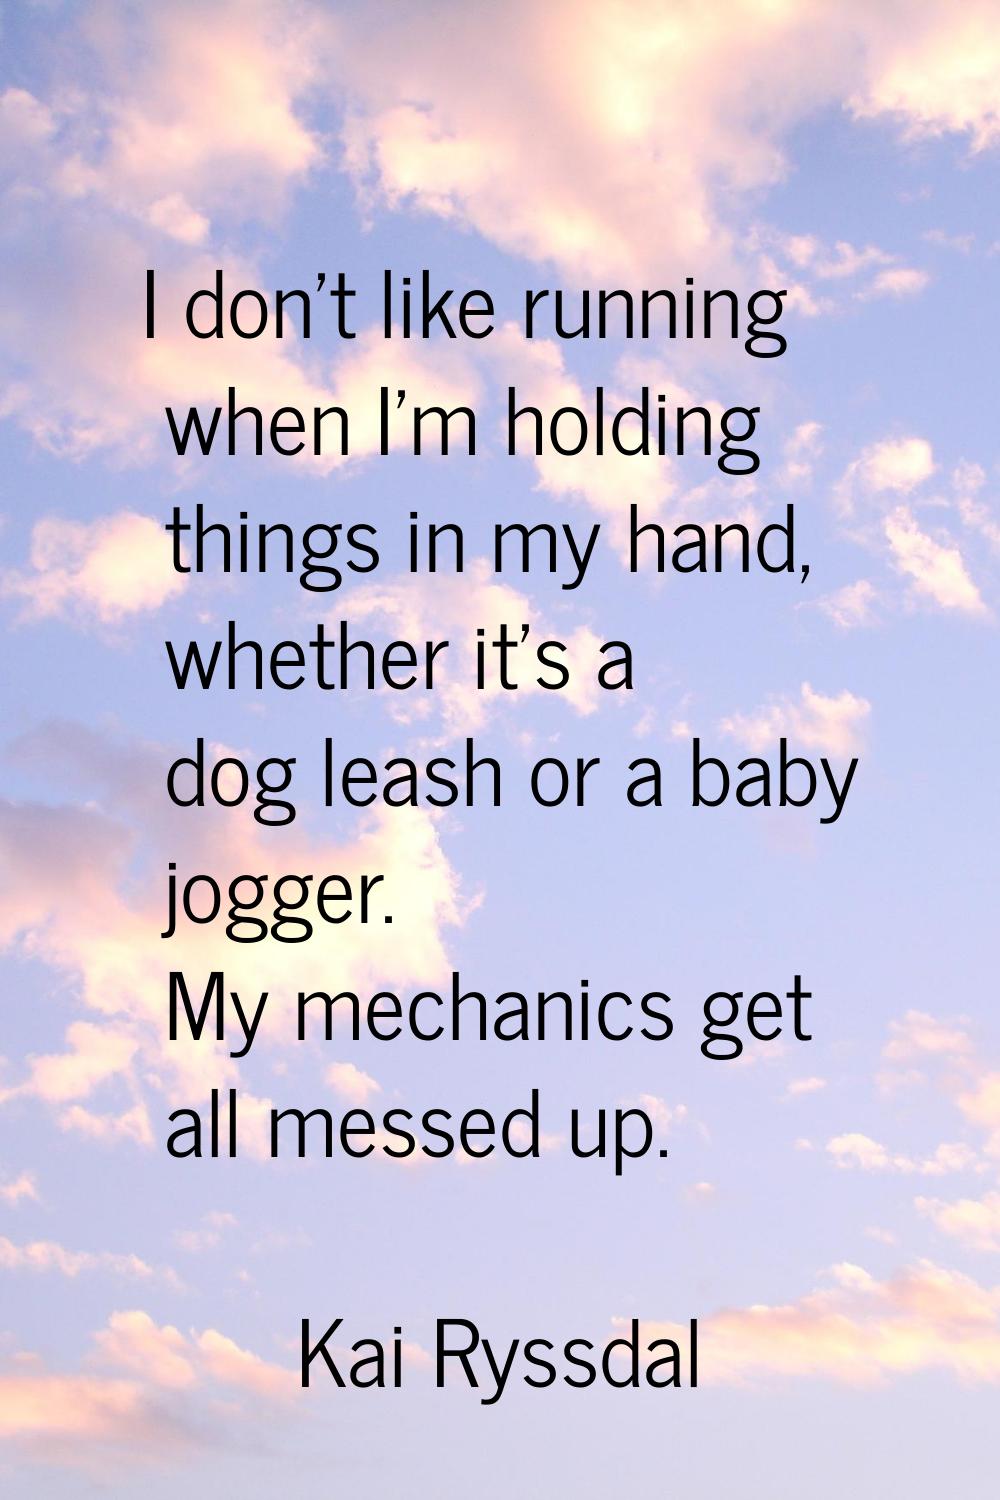 I don't like running when I'm holding things in my hand, whether it's a dog leash or a baby jogger.